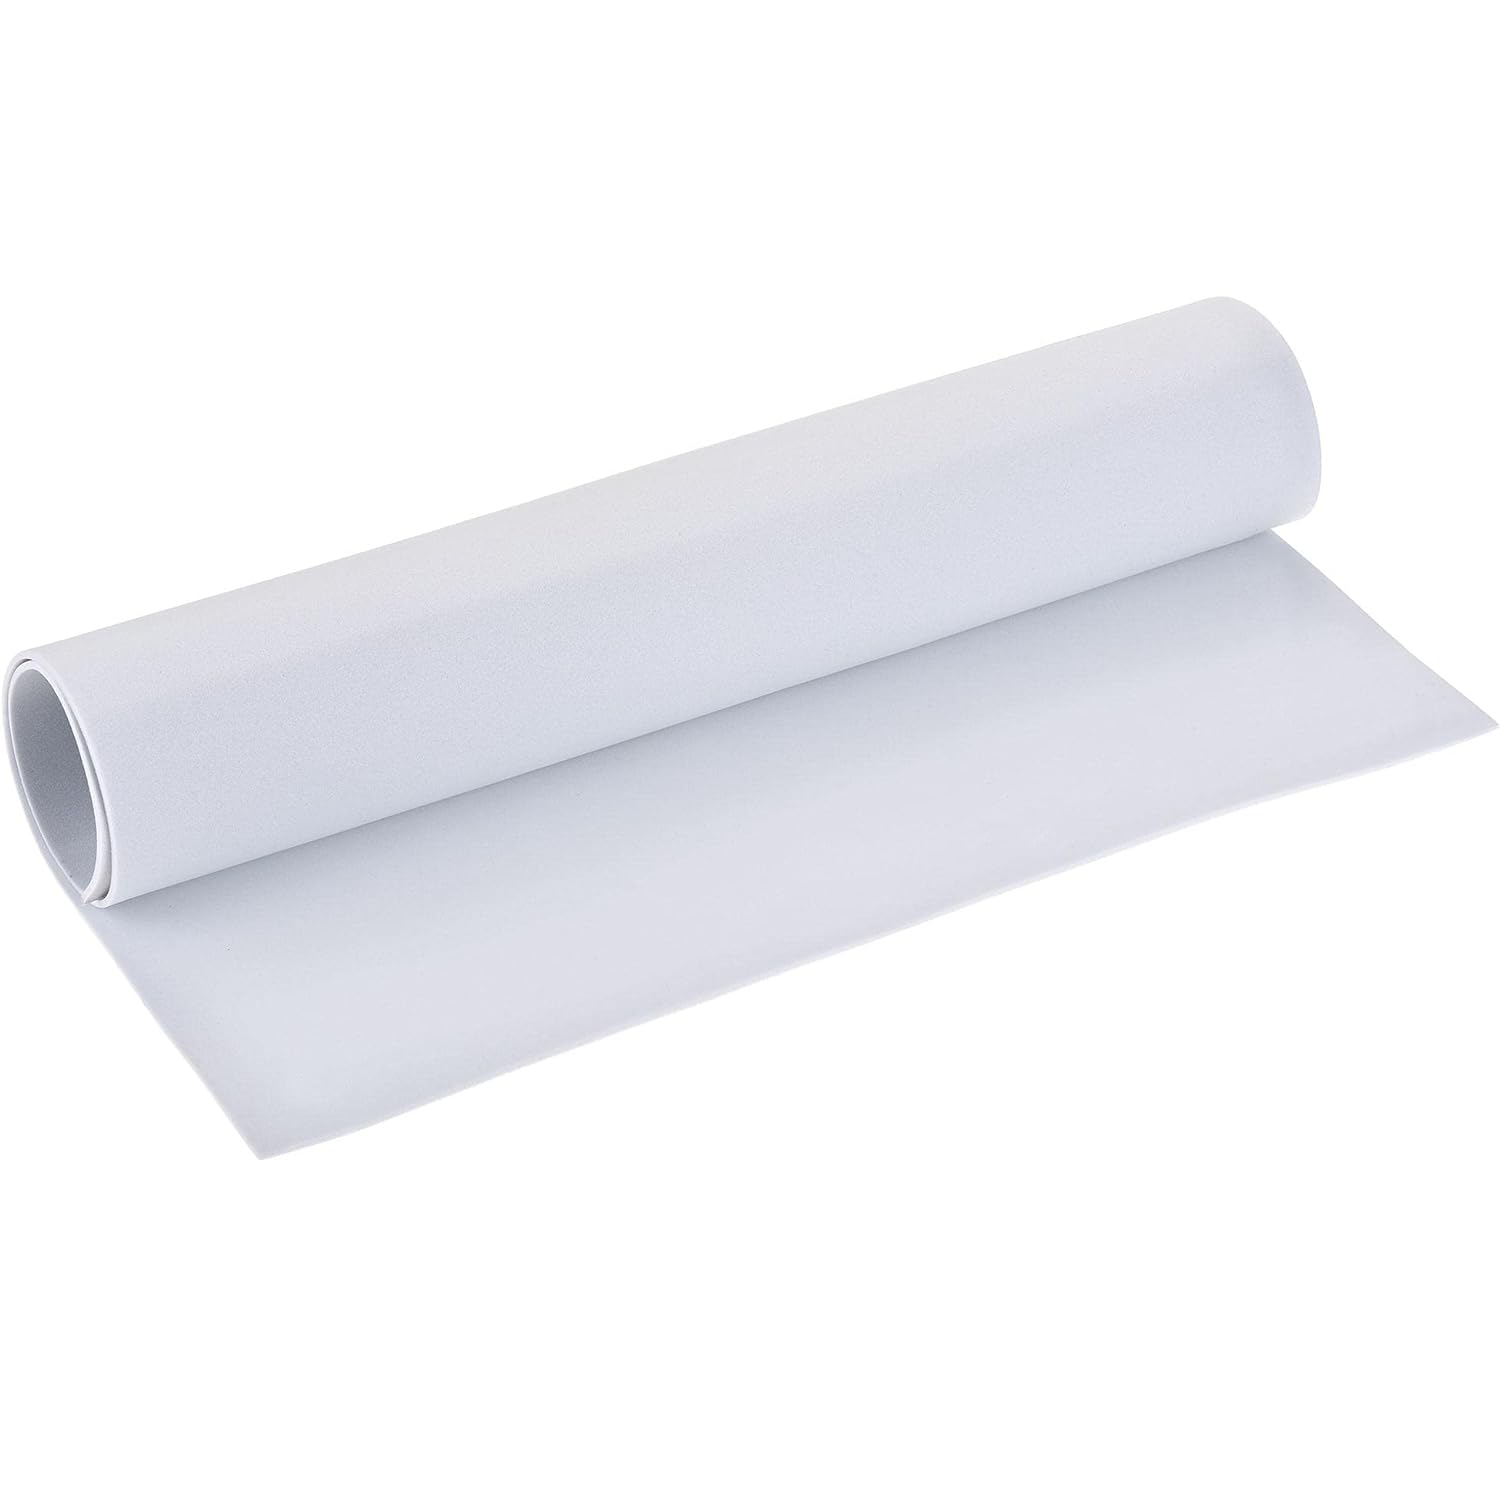 White Eva Foam Cosplay Sheets Roll Premium Eva Craft Foam 2mm Thick 13.5" x 49" High Density 86kg/m3 For Cosplay Costume Crafts DIY Projects By PAIDU